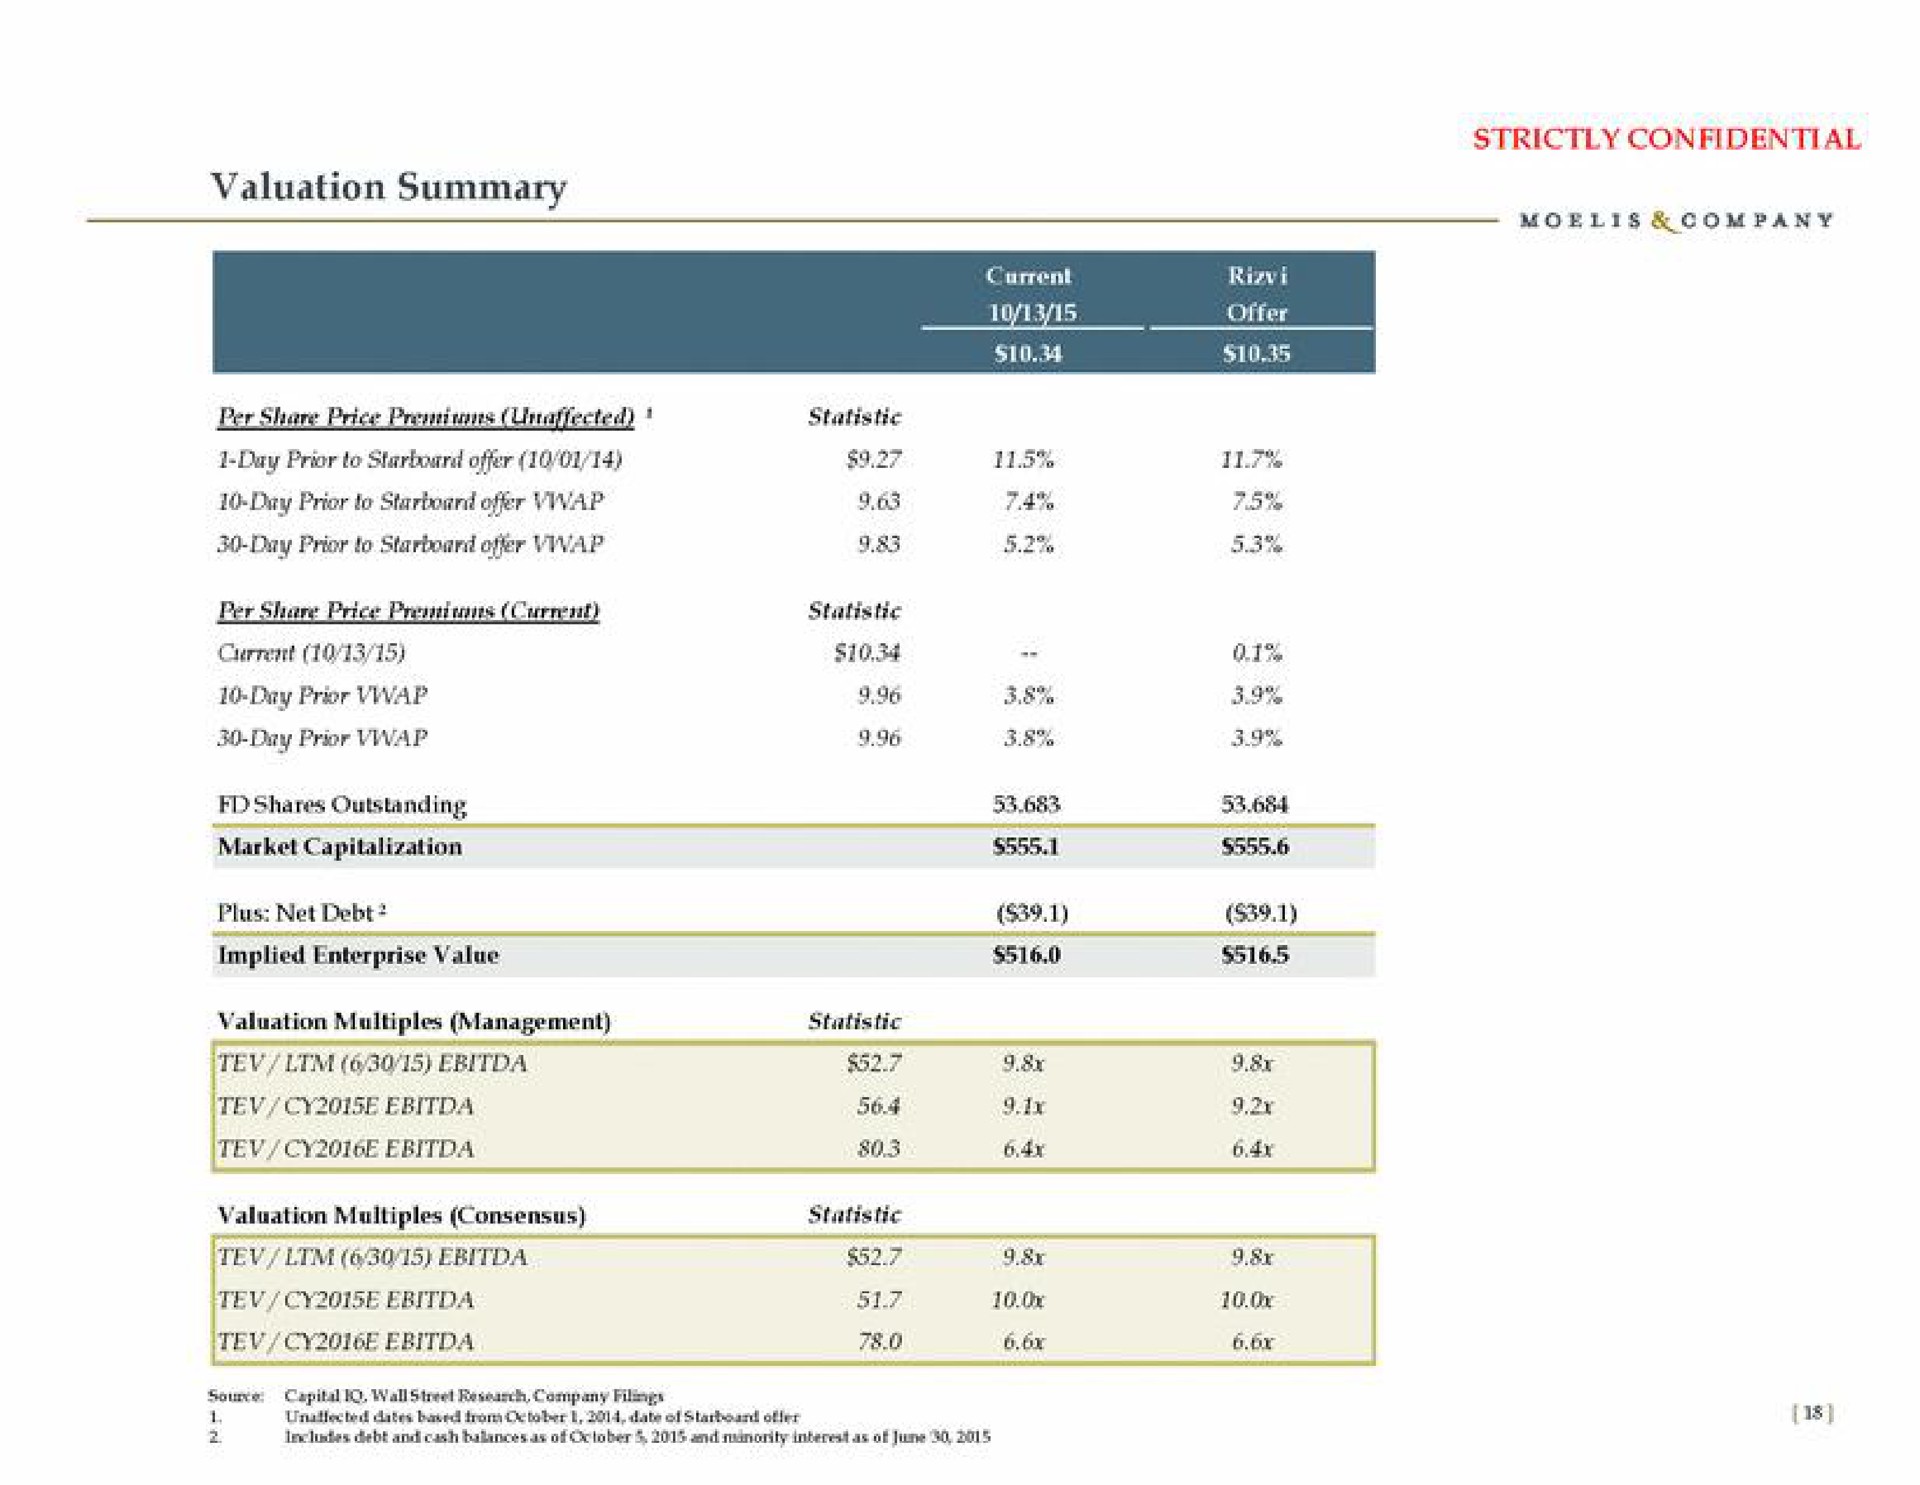 valuation summary per share price statistic | Moelis & Company